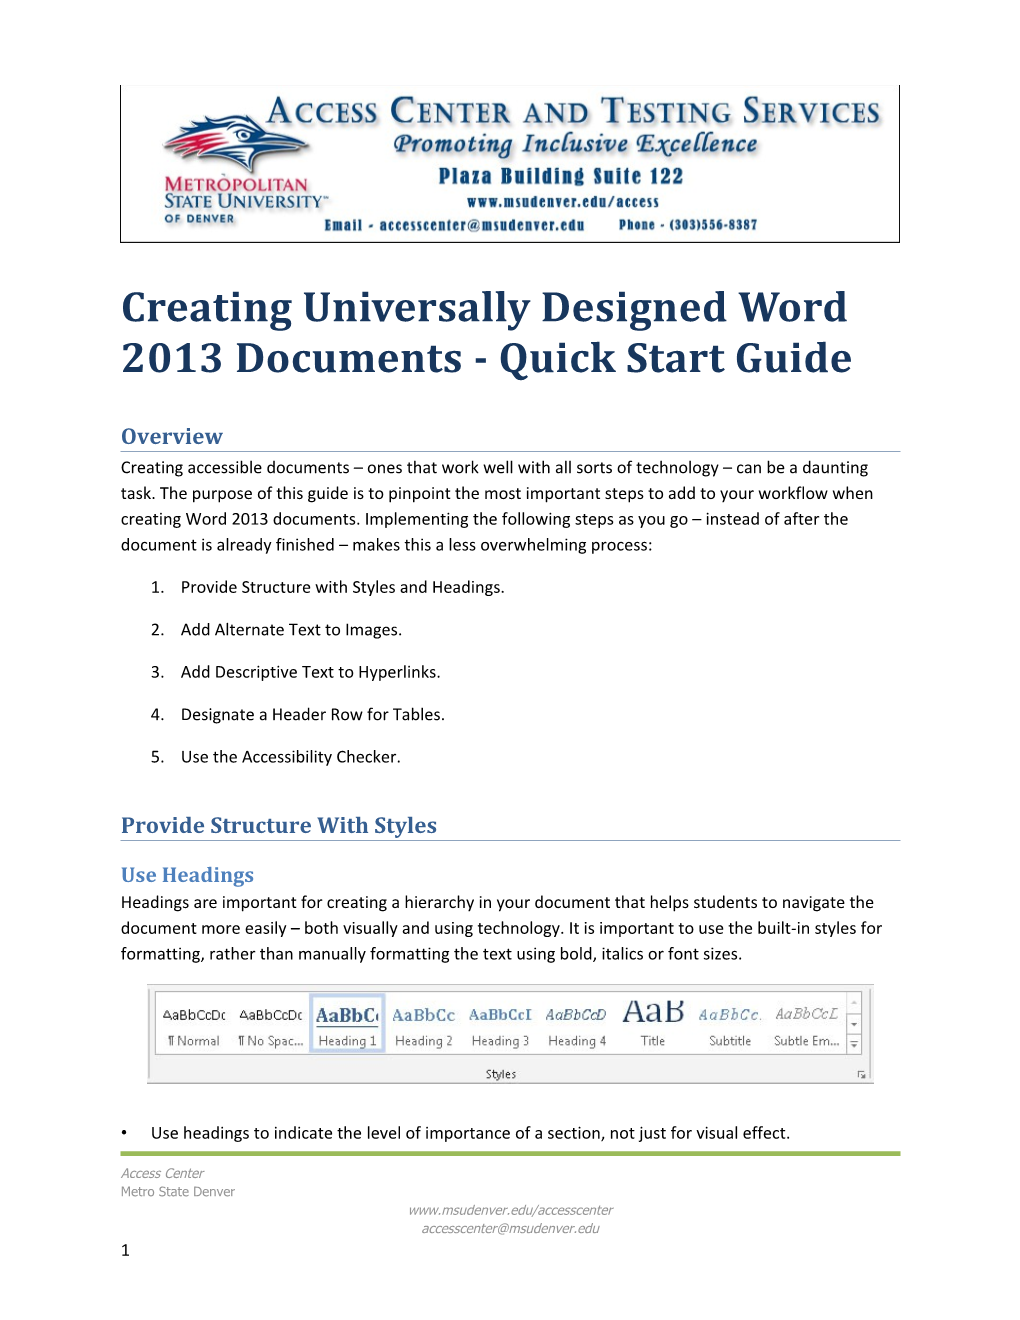 Creating Universally Designed Word 2013 Documents - Quick Start Guide